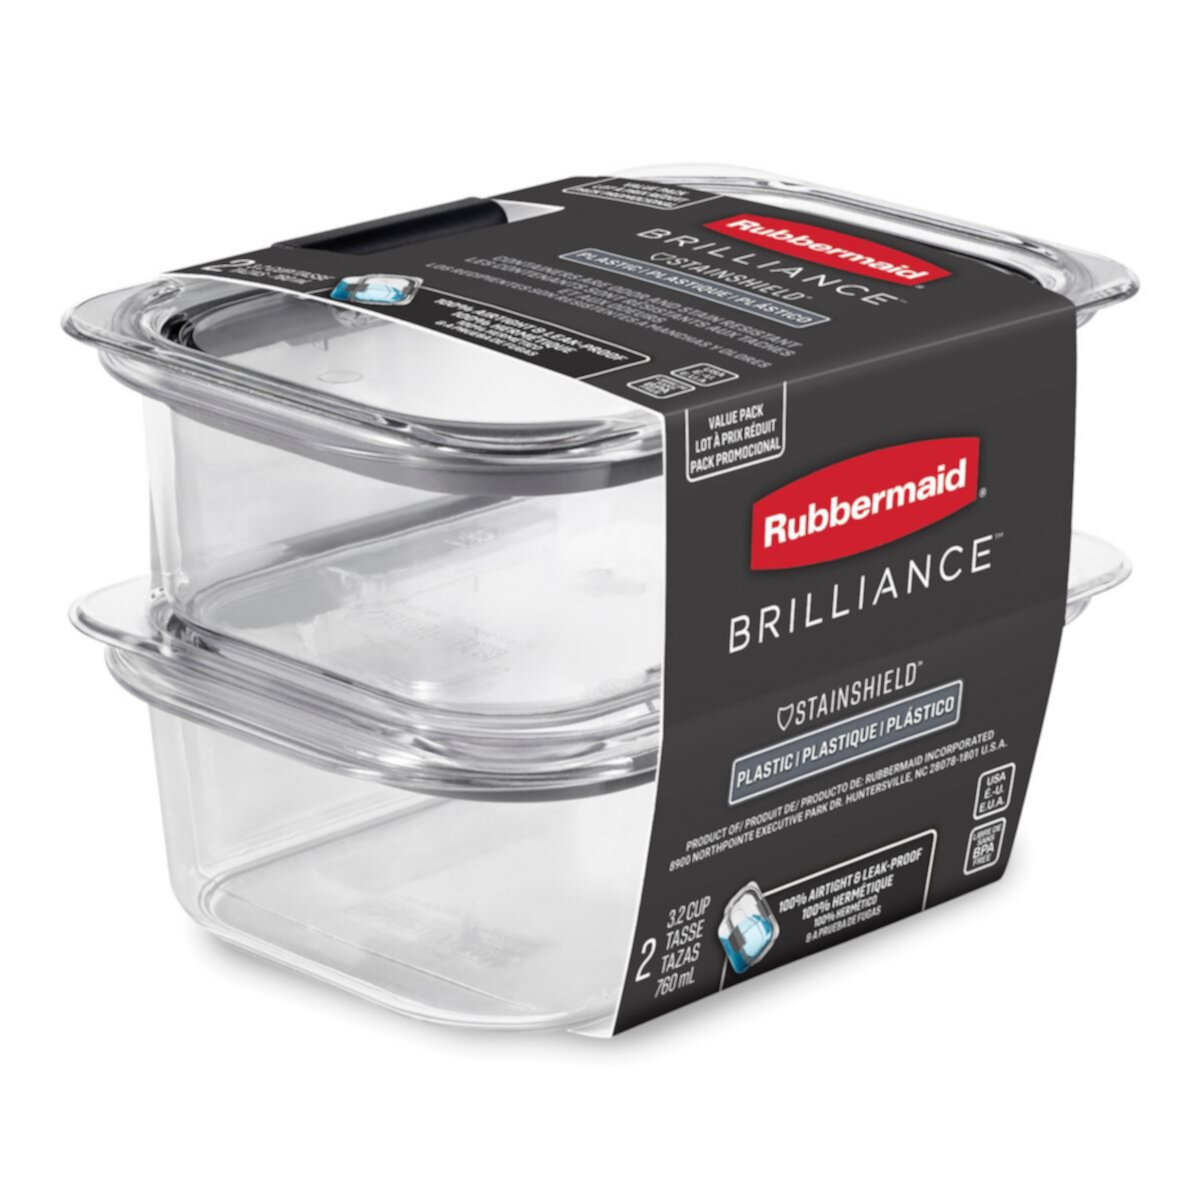 Rubbermaid Brilliance 2-pc. 3.2-Cup Food Storage Container Set Rubbermaid